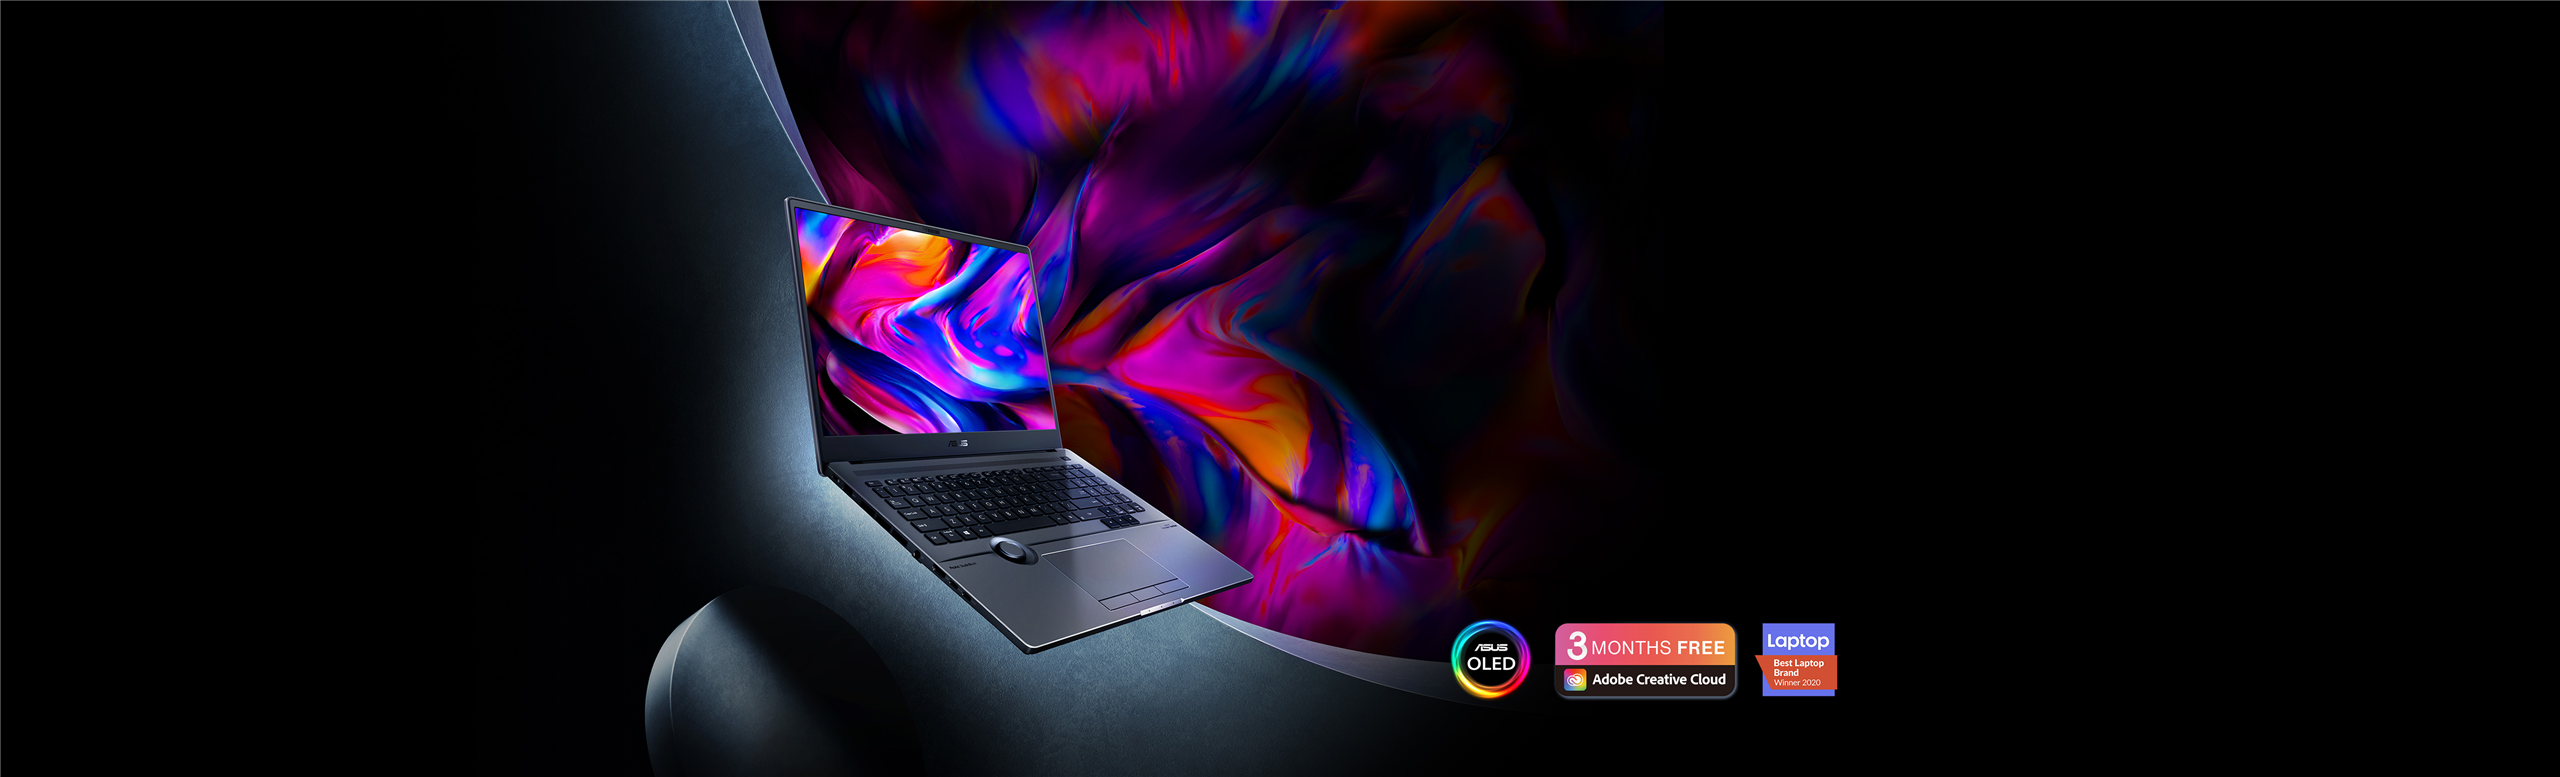 ProArt Studiobook 16 OLED is wide open and faced to the left with colorful whirling lines hovering on the screen. ASUS OLED logo and 3-months-free Adobe subscription alongside the Best laptop brand winner 2020 badge are placed by the laptop.